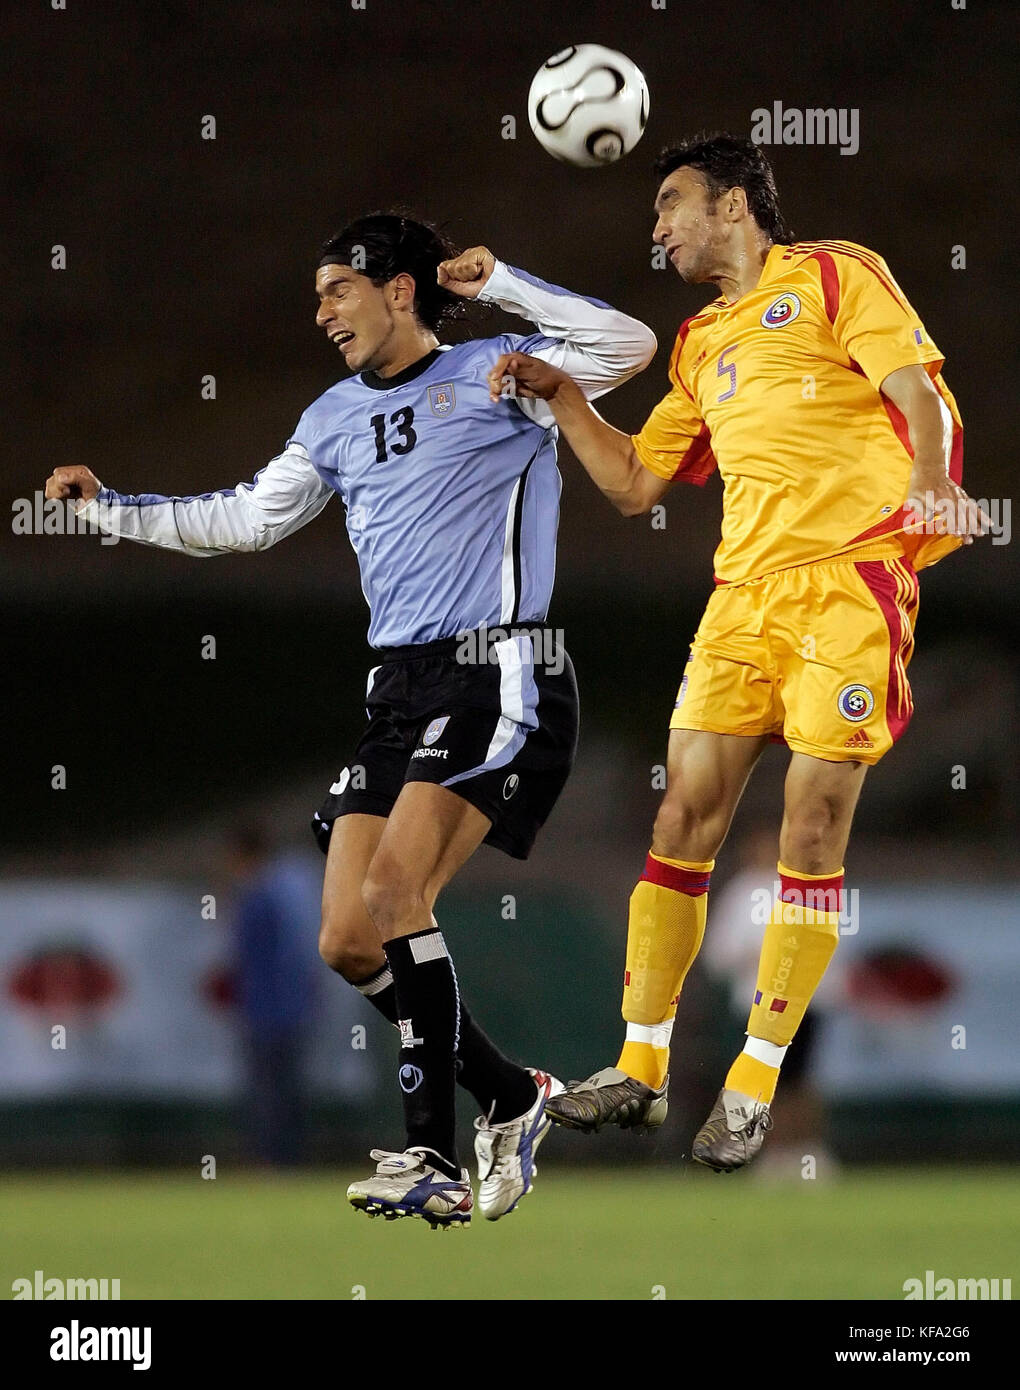 Romania's Adrian Yensci, right, heads the ball over Uruguay's Sebastian Abreu during the first half of a soccer match in Los Angeles on Tuesday, May 23, 2006. Photo by Francis Specker Stock Photo